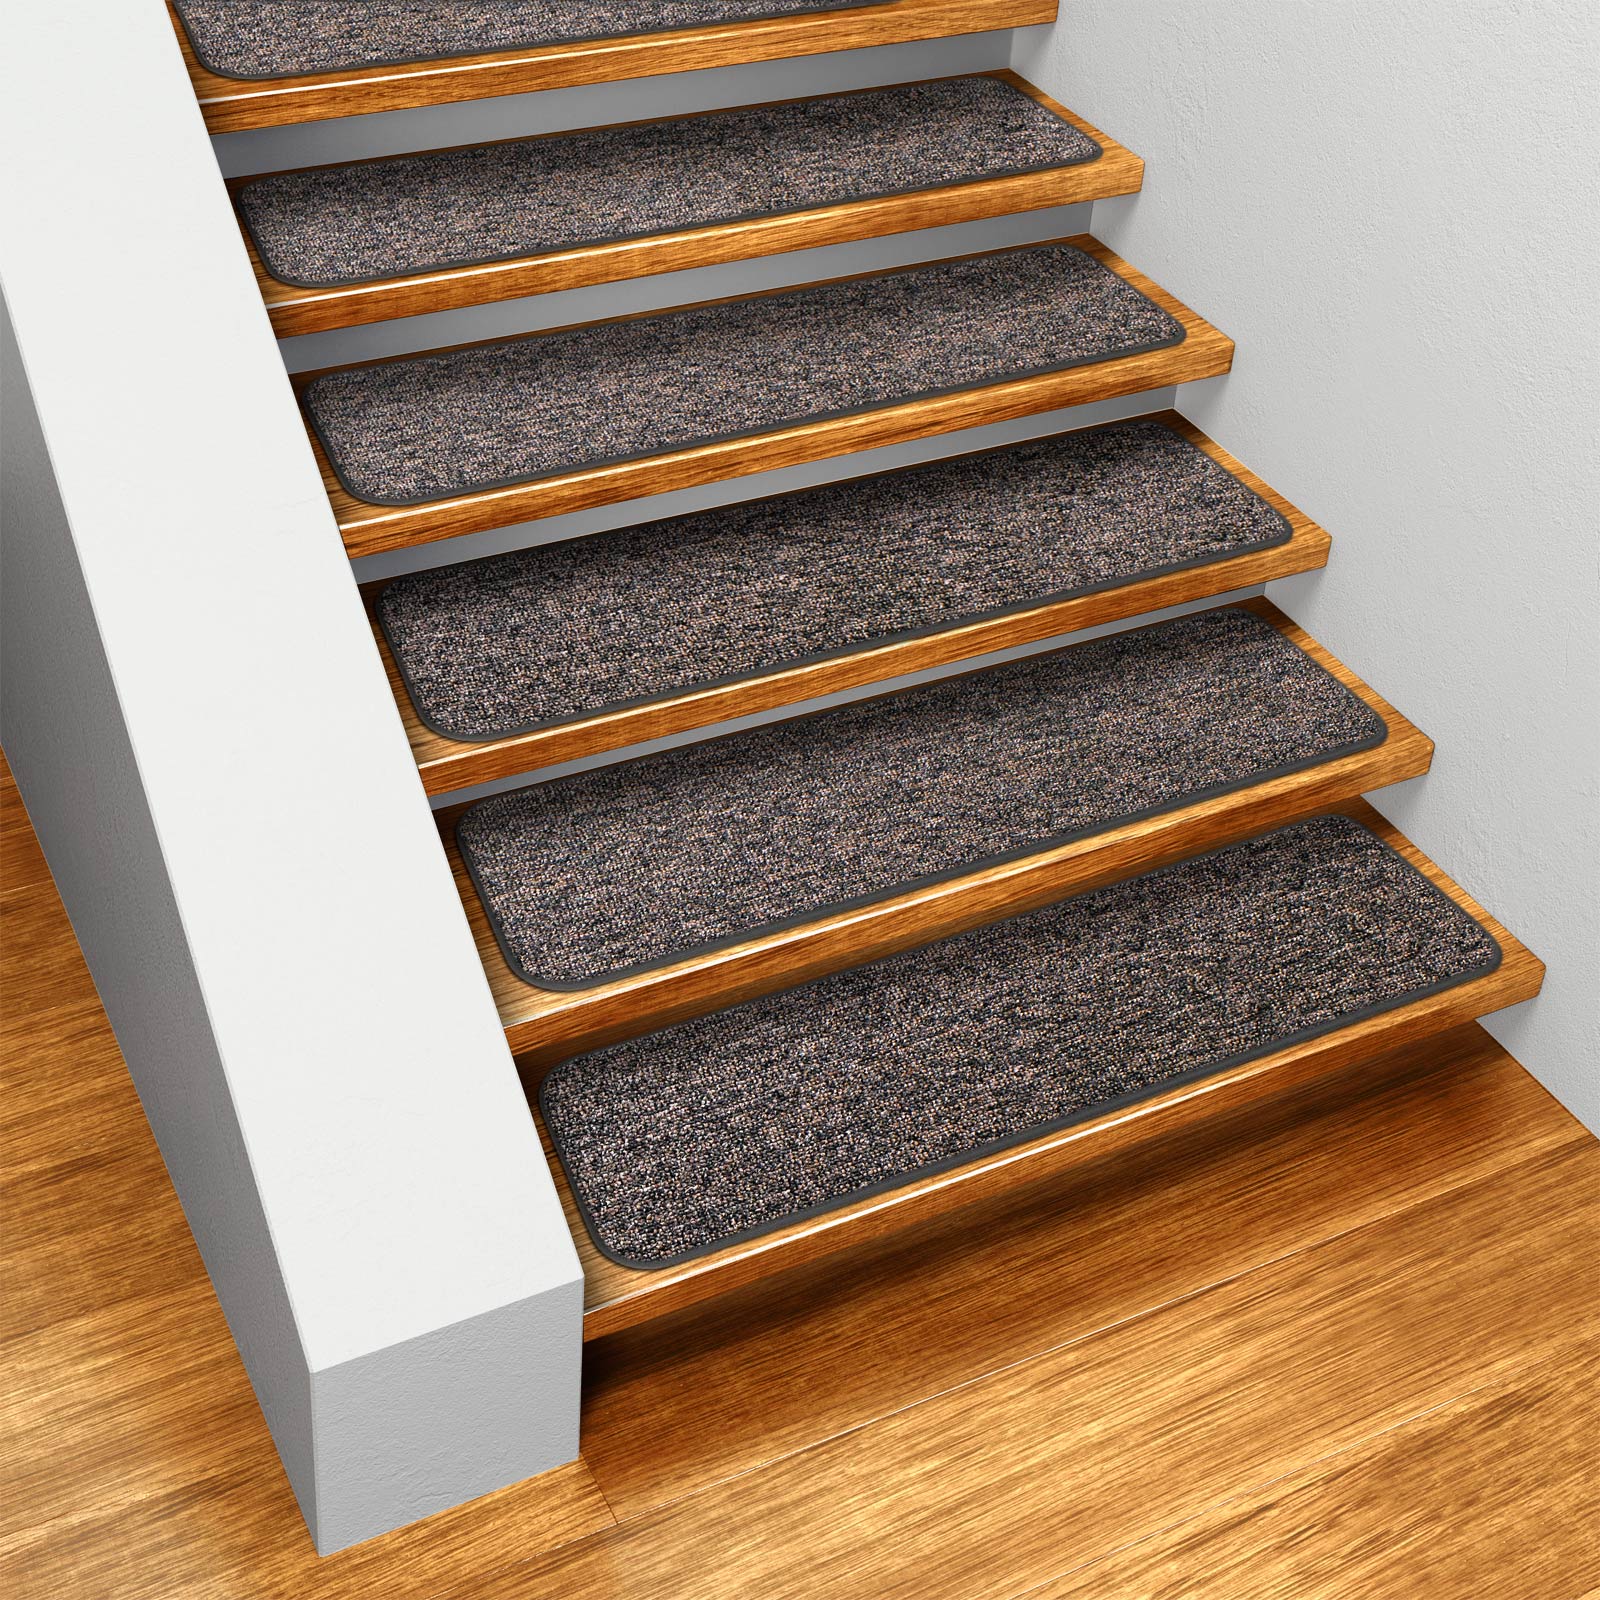 House, Home and More Set of 15 Skid-resistant Carpet Stair Treads - Pebble Gray - 8 In. X 23.5 In.